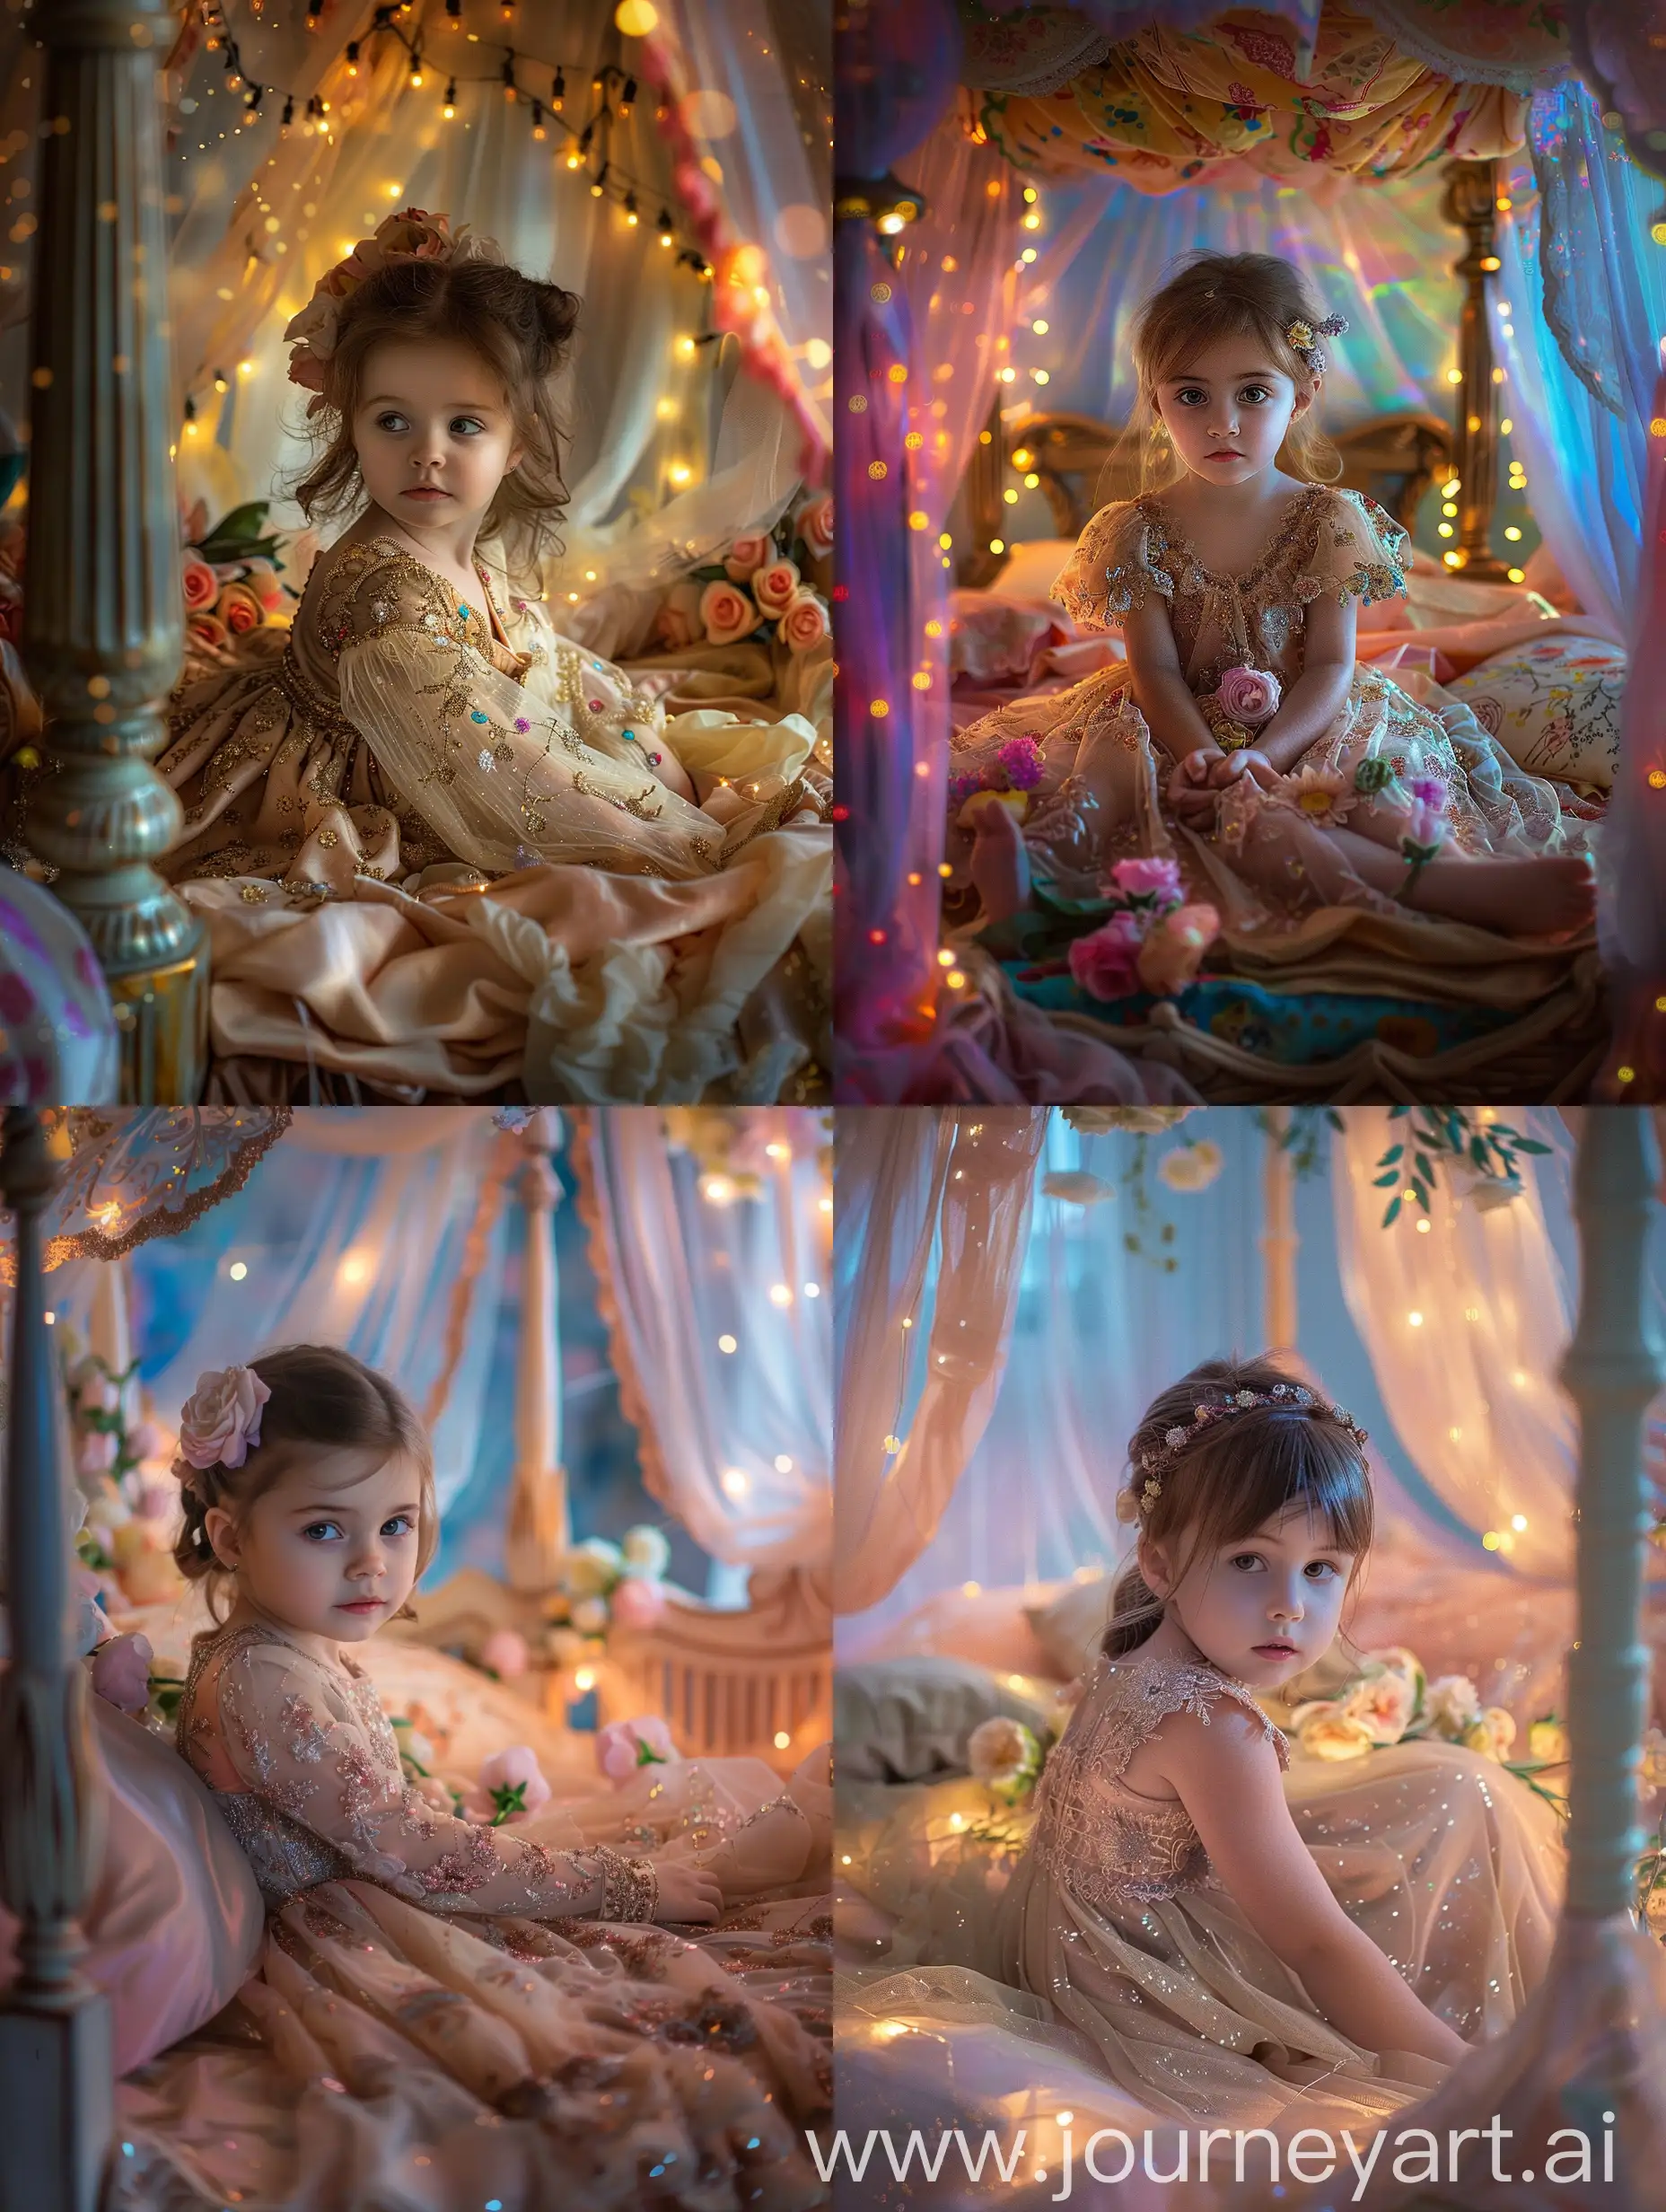 A little girl in a beautiful dress is sitting on a four-poster bed, the canopy is glowing with lights, flowers on the bed, close-up, realistic photo, hyperrealism, face is clearly visible, looking at the camera, colors of the bed, close-up photo, light photo